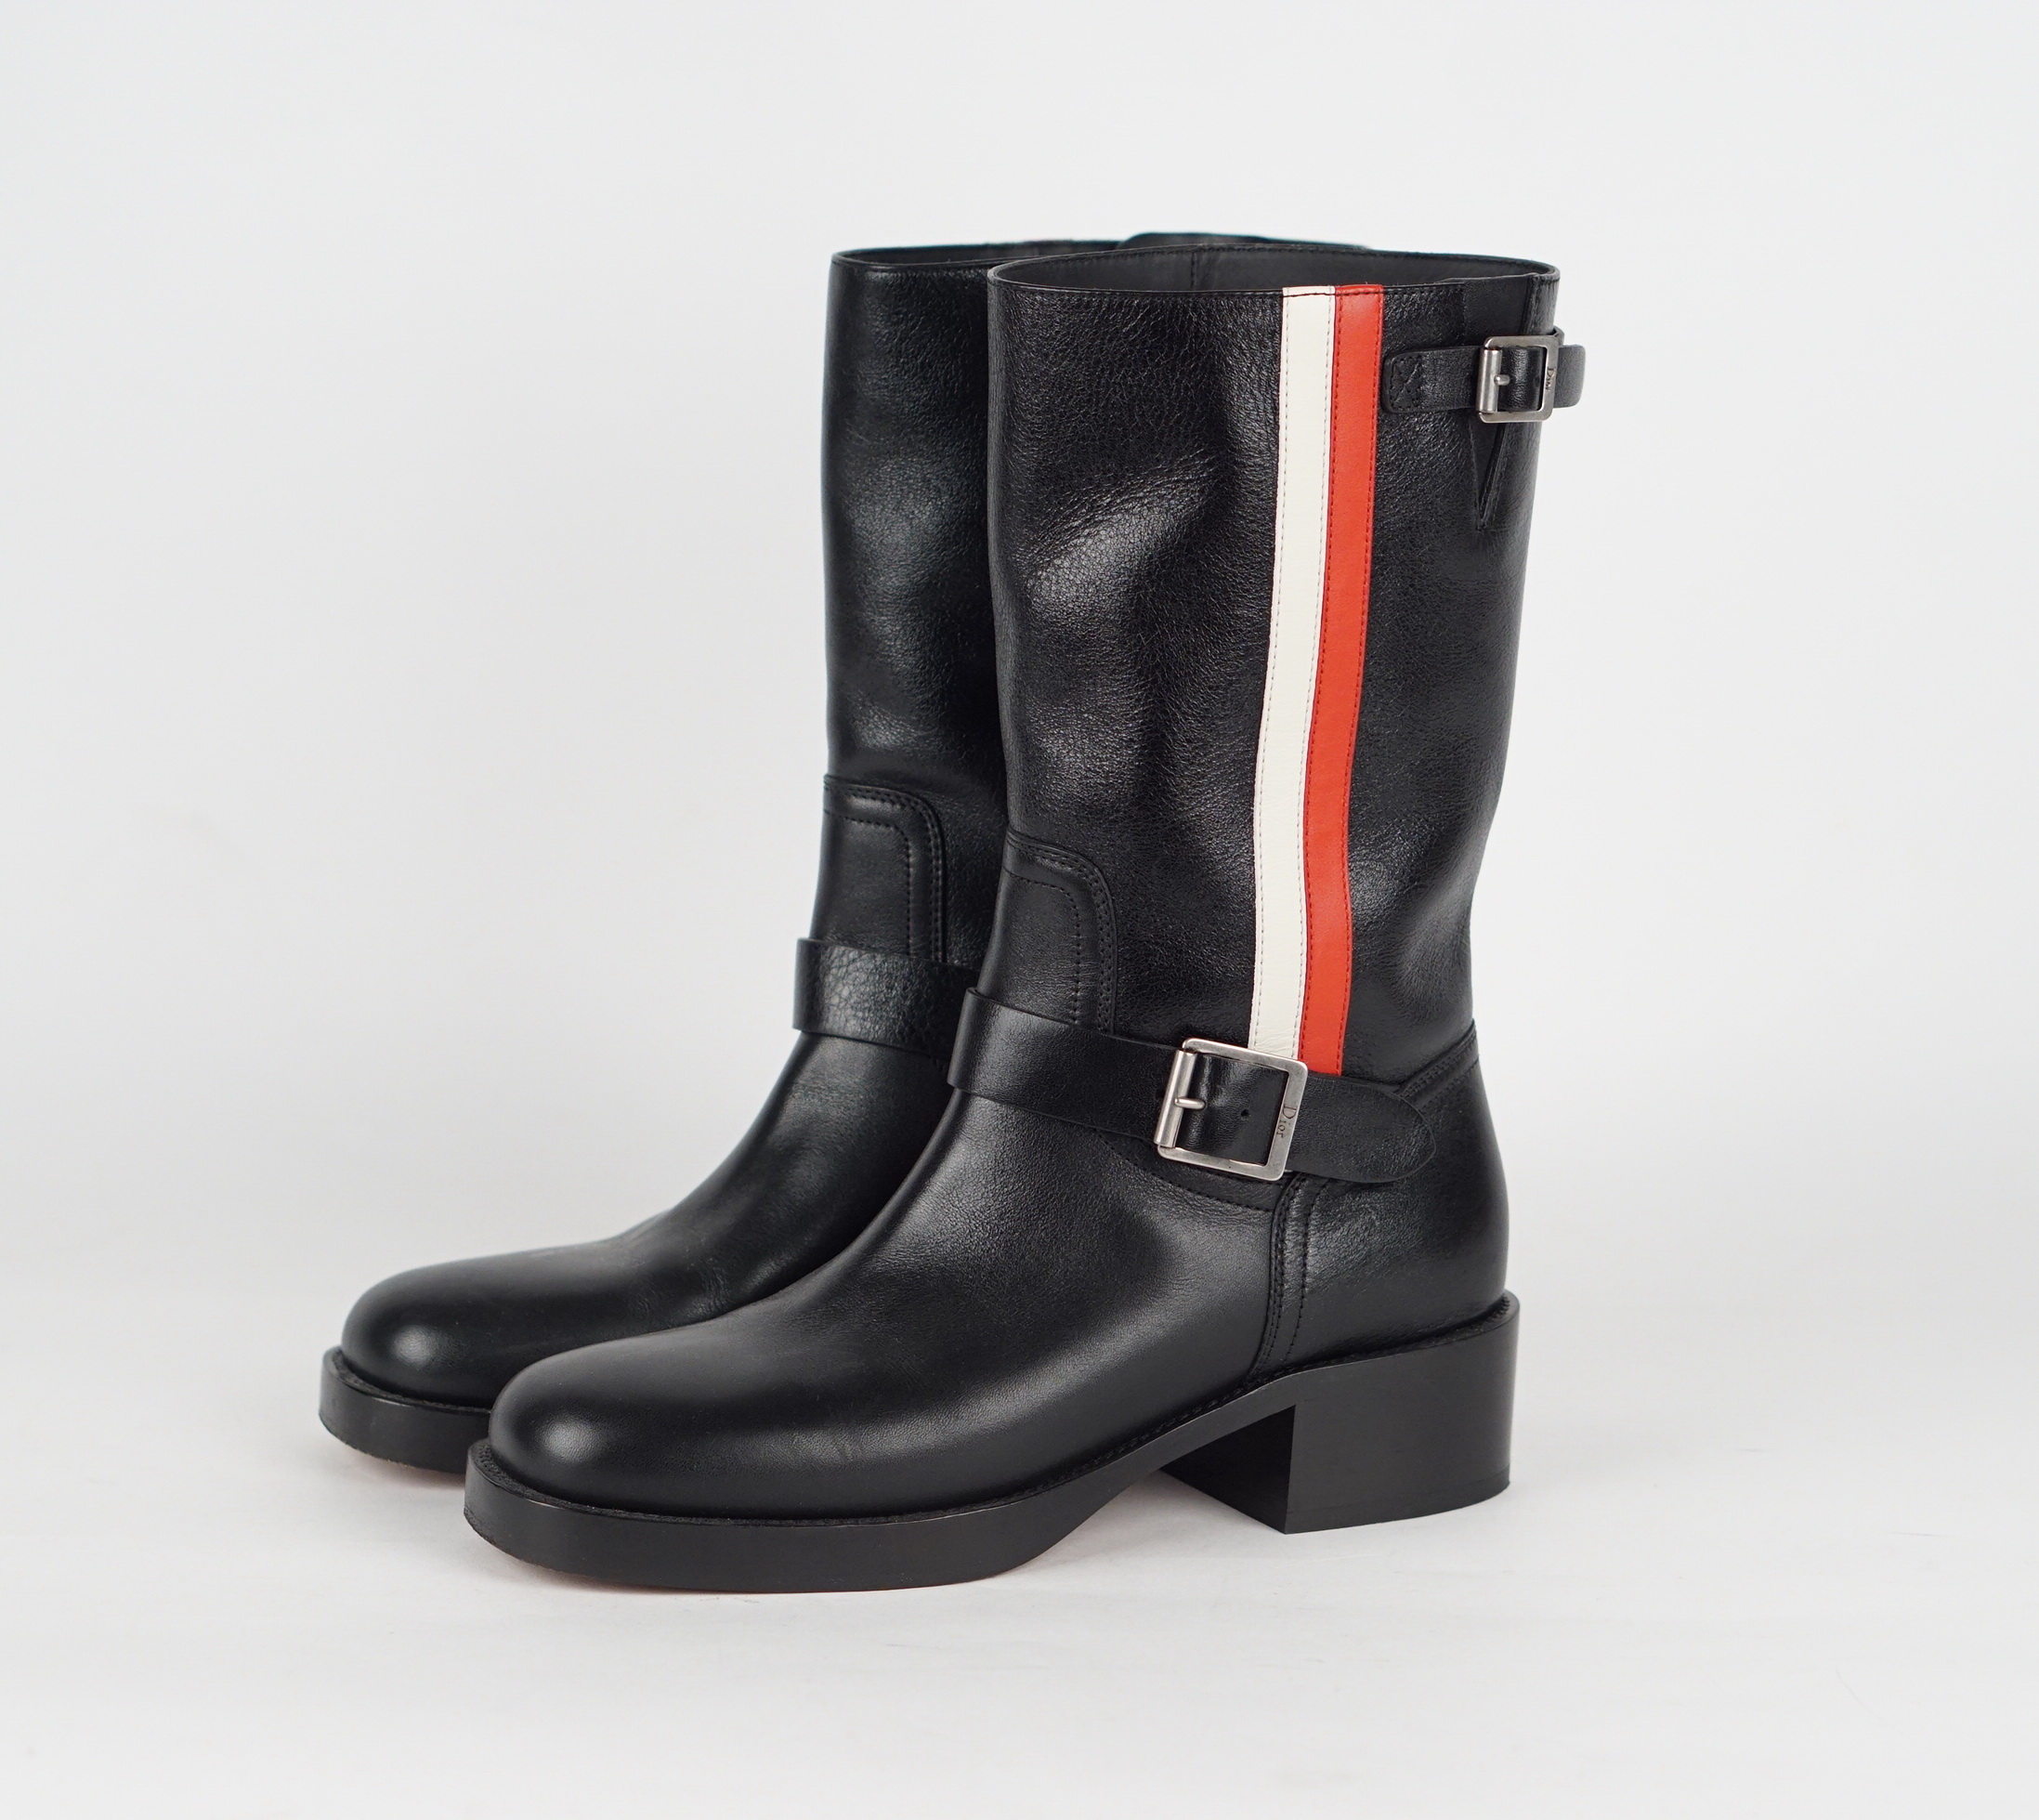 Striped Motorcycle Boots 